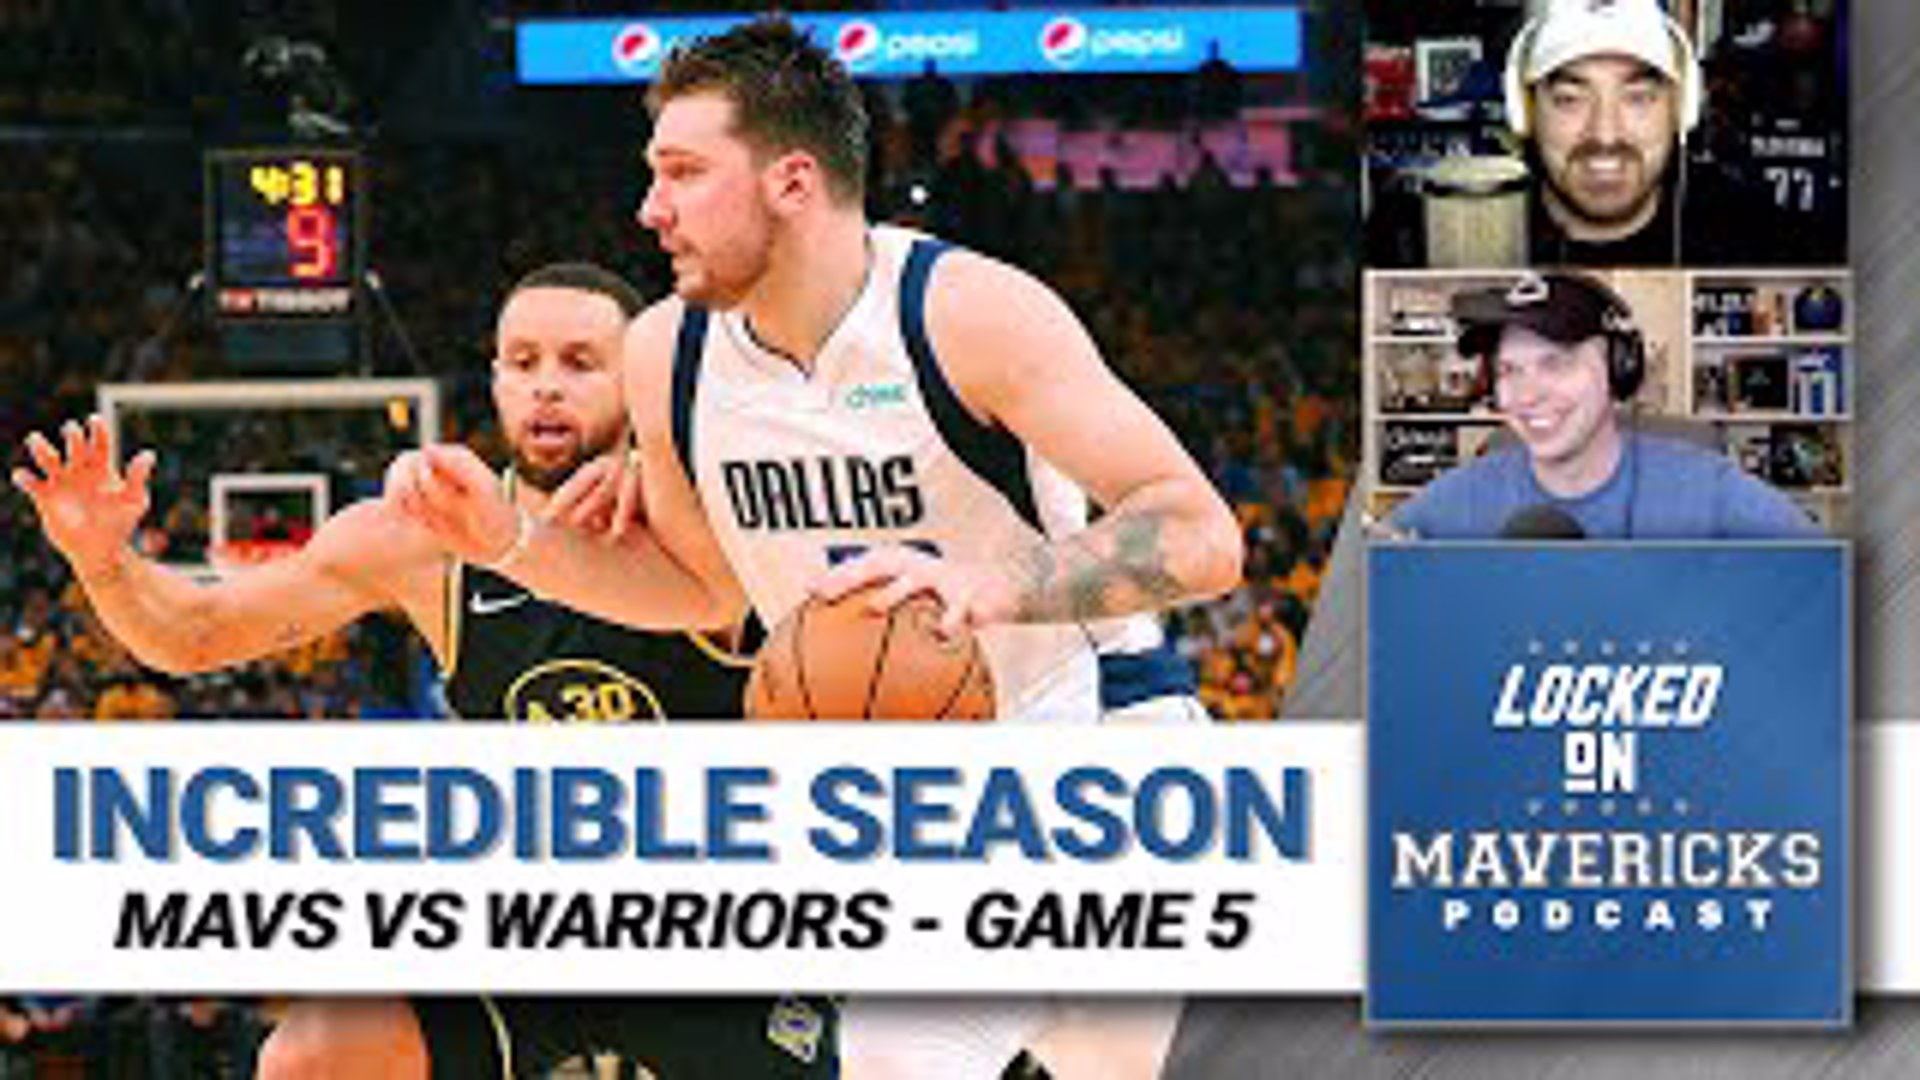 Nick Angstadt and Isaac Harris breakdown the Mavs run in the NBA playoffs and their Game 5 loss to the Warriors.